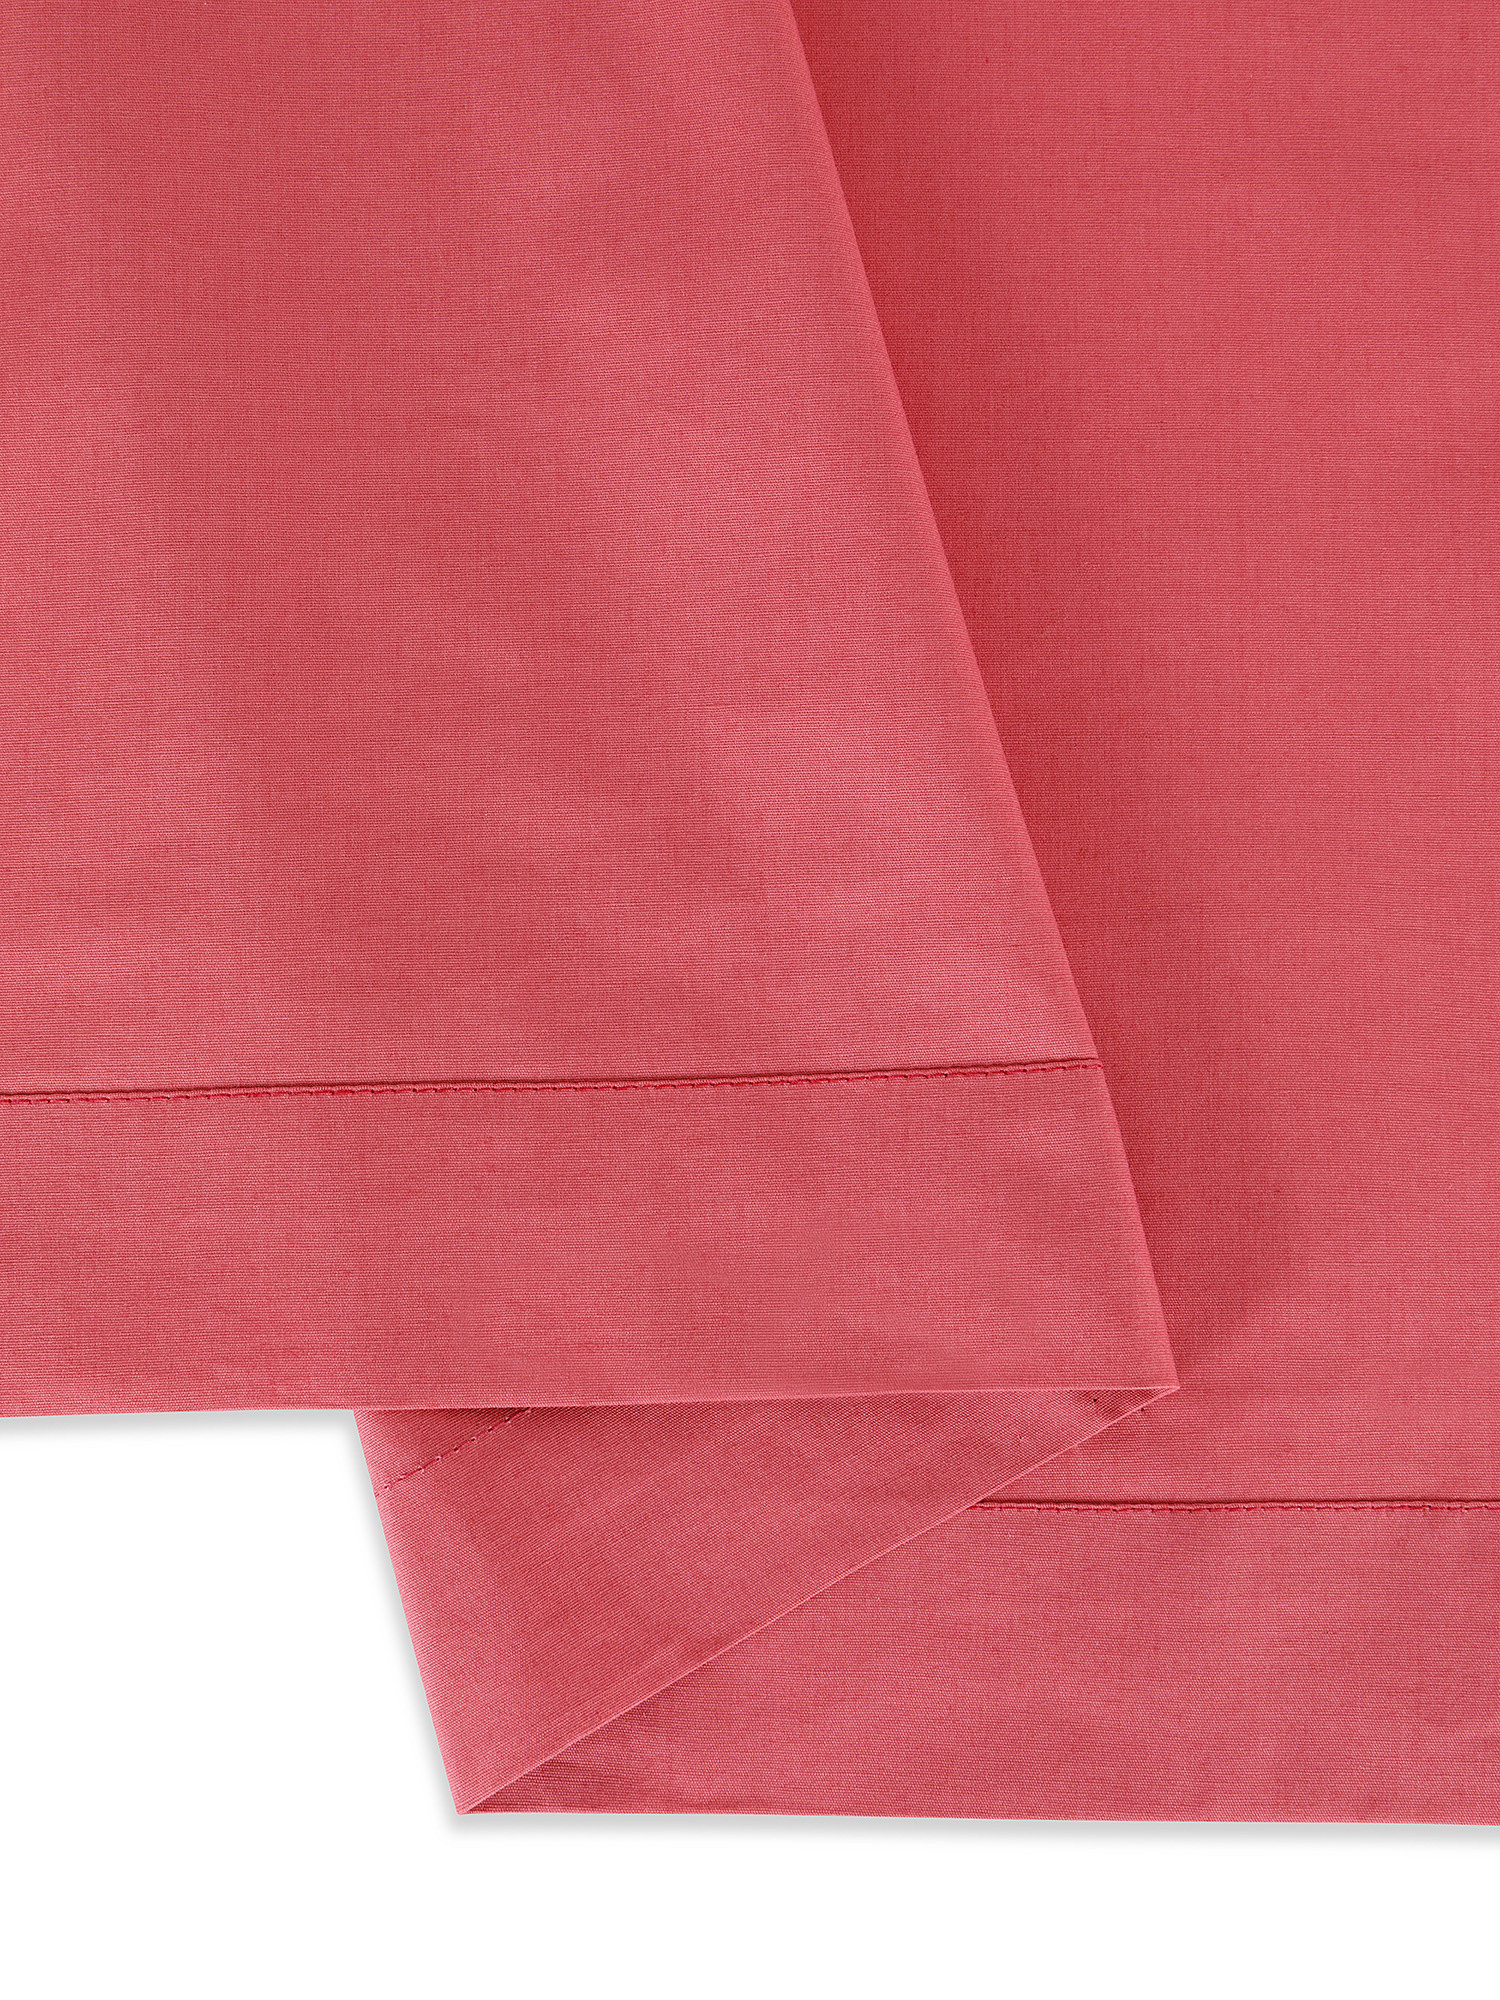 Solid color cotton percale sheet set, Pink, large image number 2